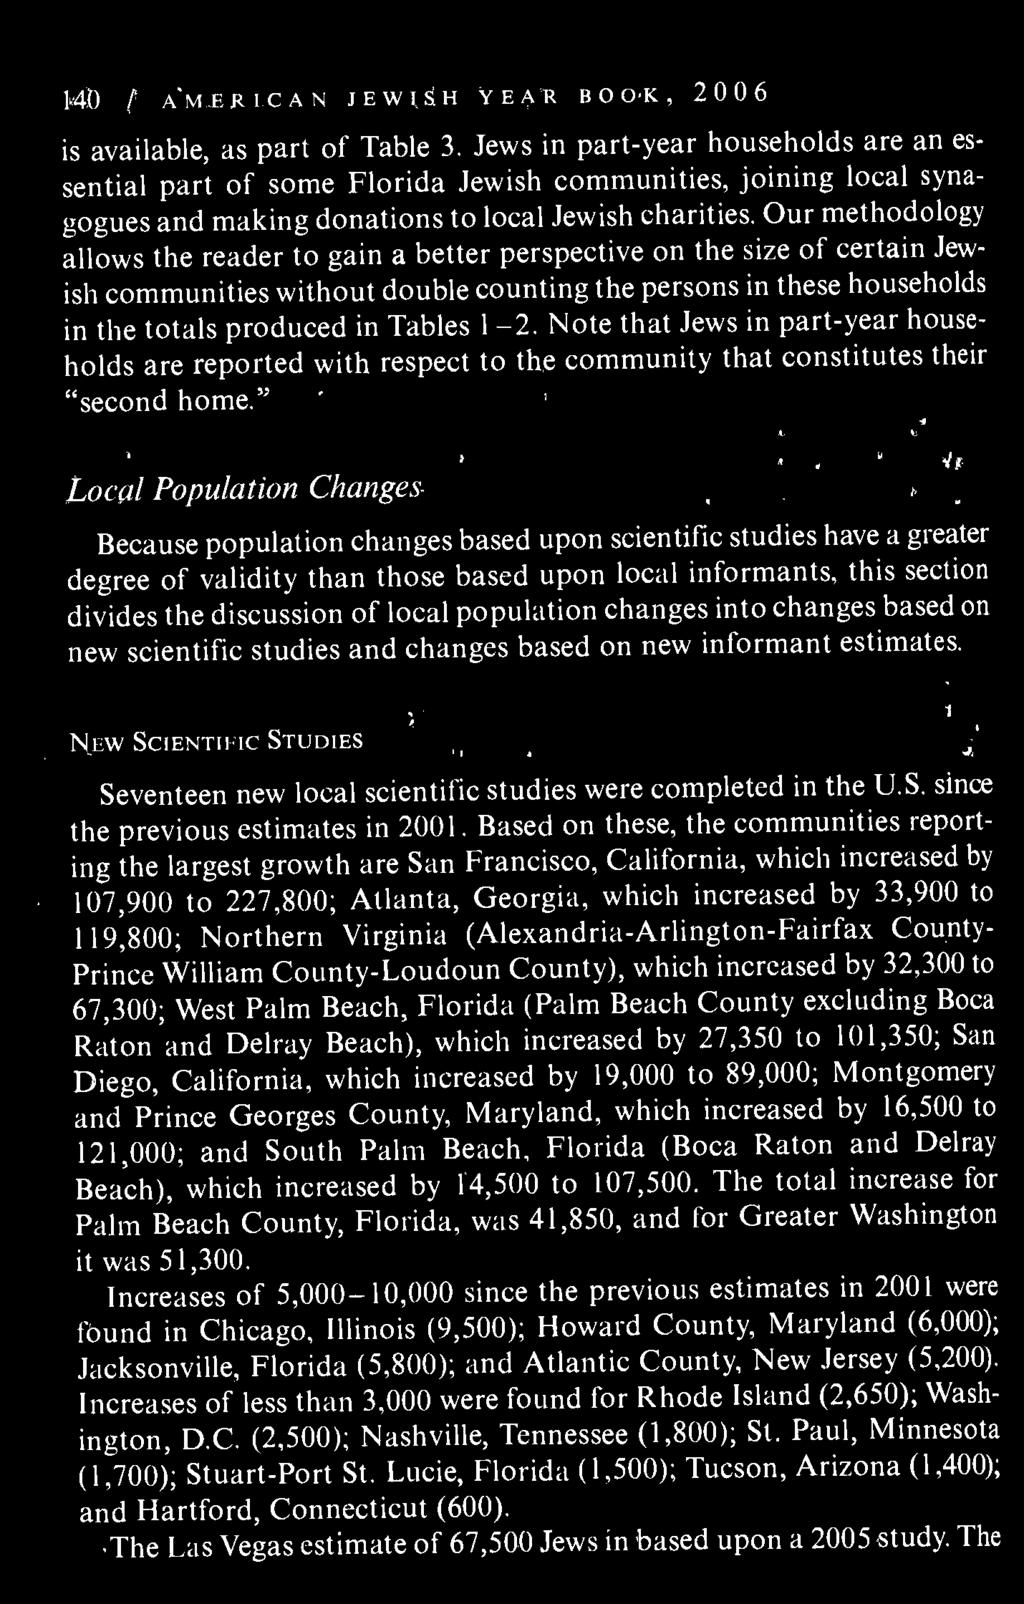 " Local Population Changes Because population changes based upon scientific studies have a greater degree of validity than those based upon local informants, this section divides the discussion of